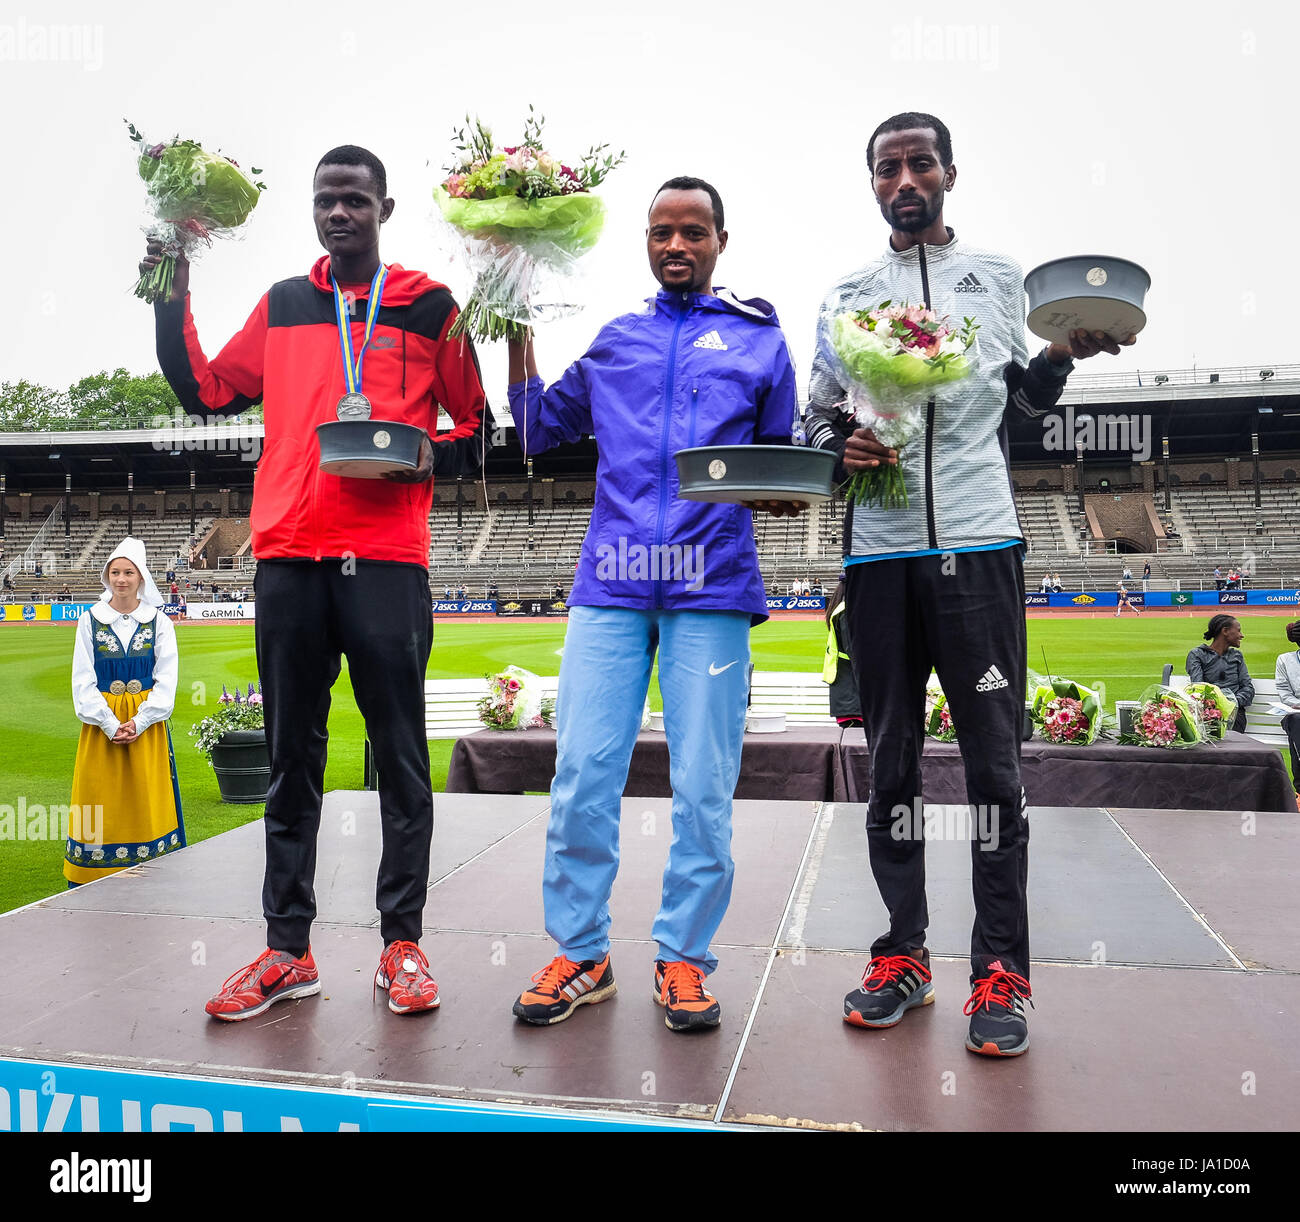 Stockholm. 3rd June, 2017. Abrha Milaw (C) of Ethiopia celebrates during  the awarding ceremony for the Stockholm Marathon 2017 in Stockholm, capital  of Sweden on June 3, 2017. Milaw won with a